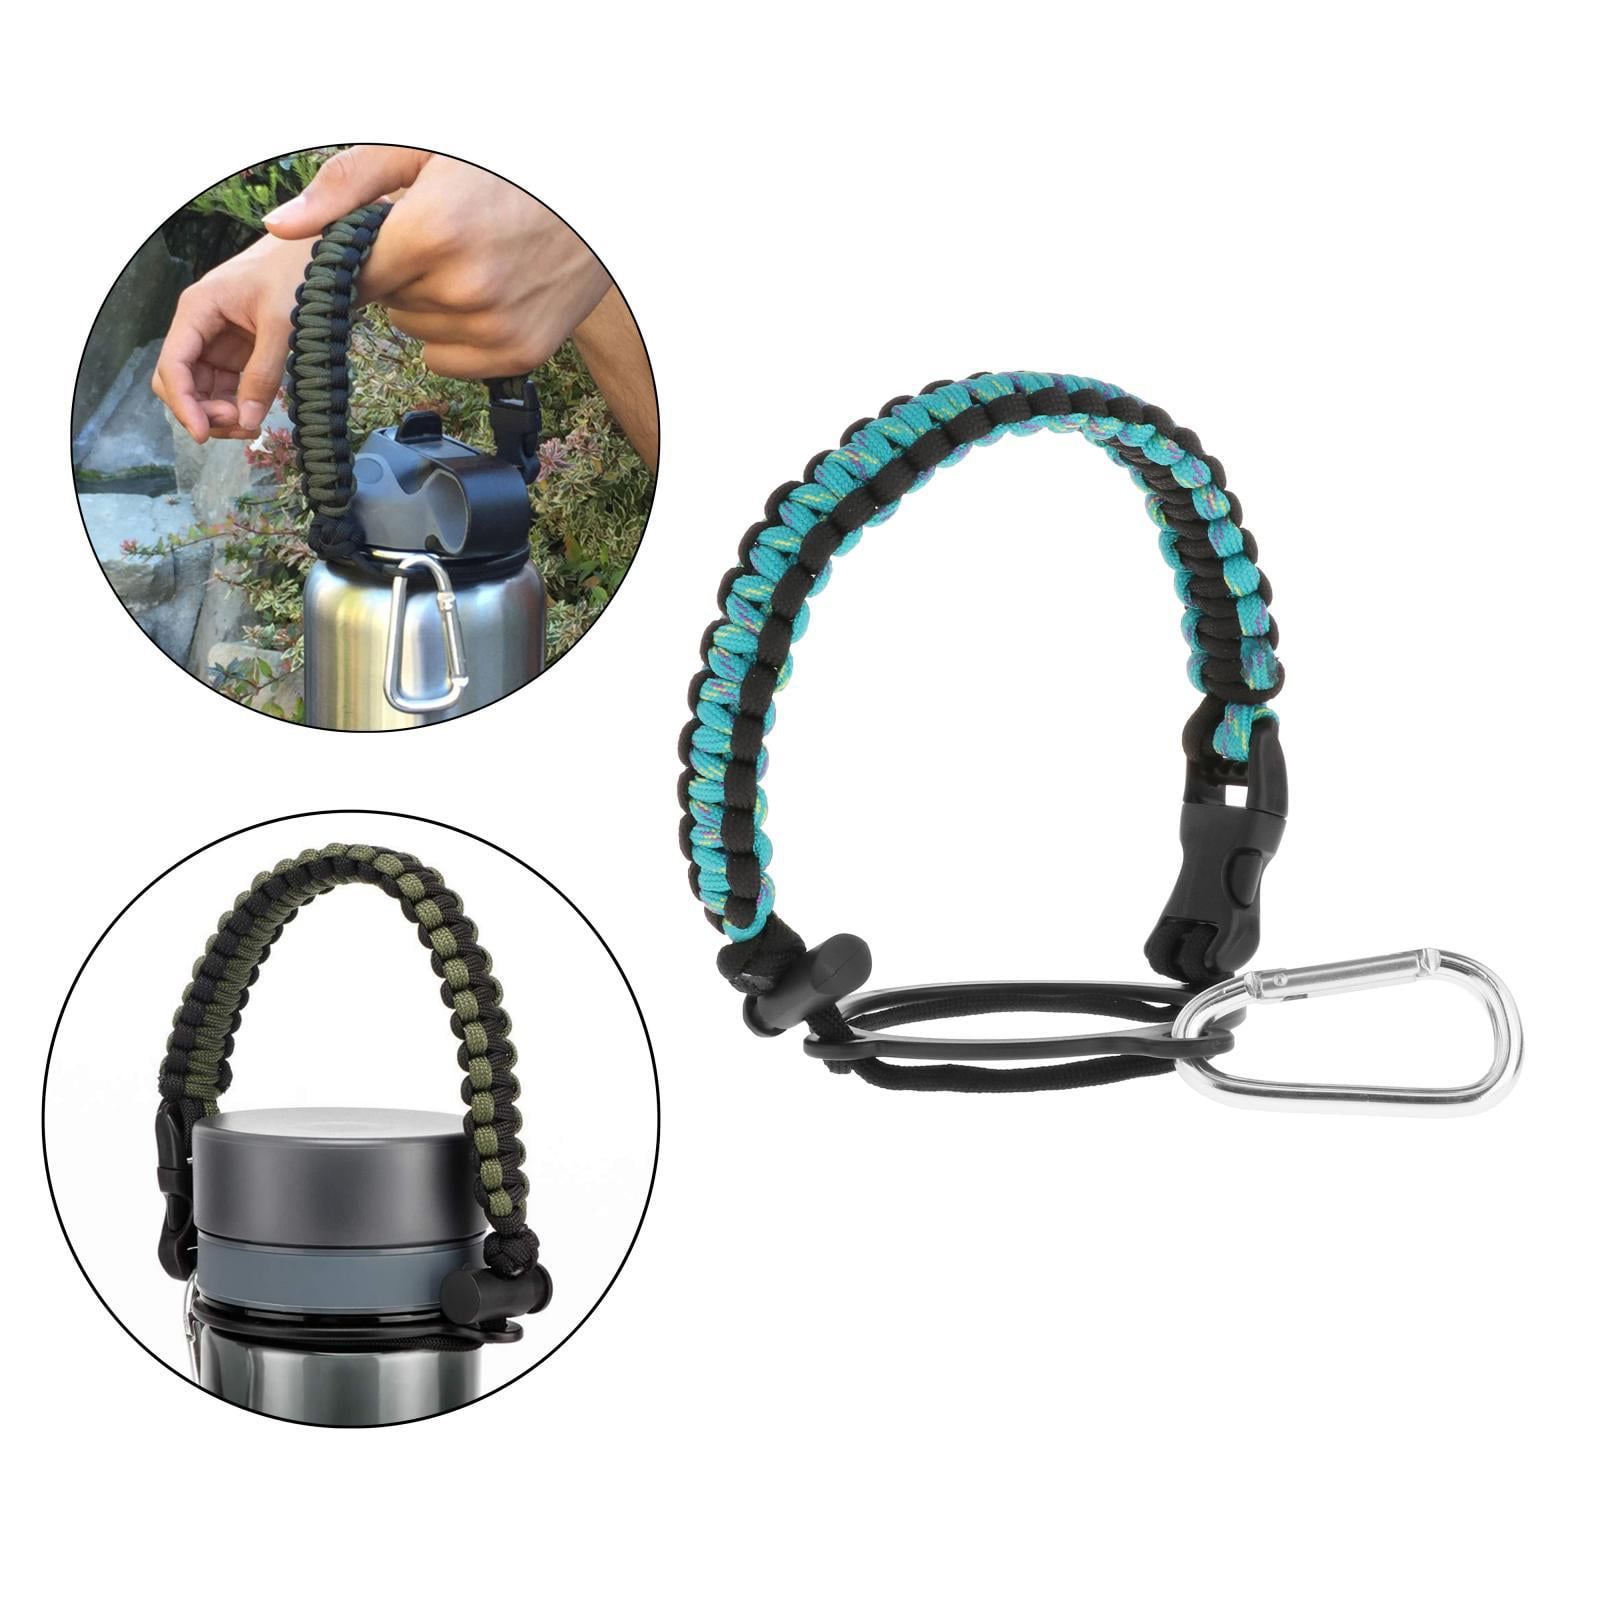 Hydro Flask Paracord Water Bottle Handle Holder for Hydro Flask1.0 Hiking Camping Sports 